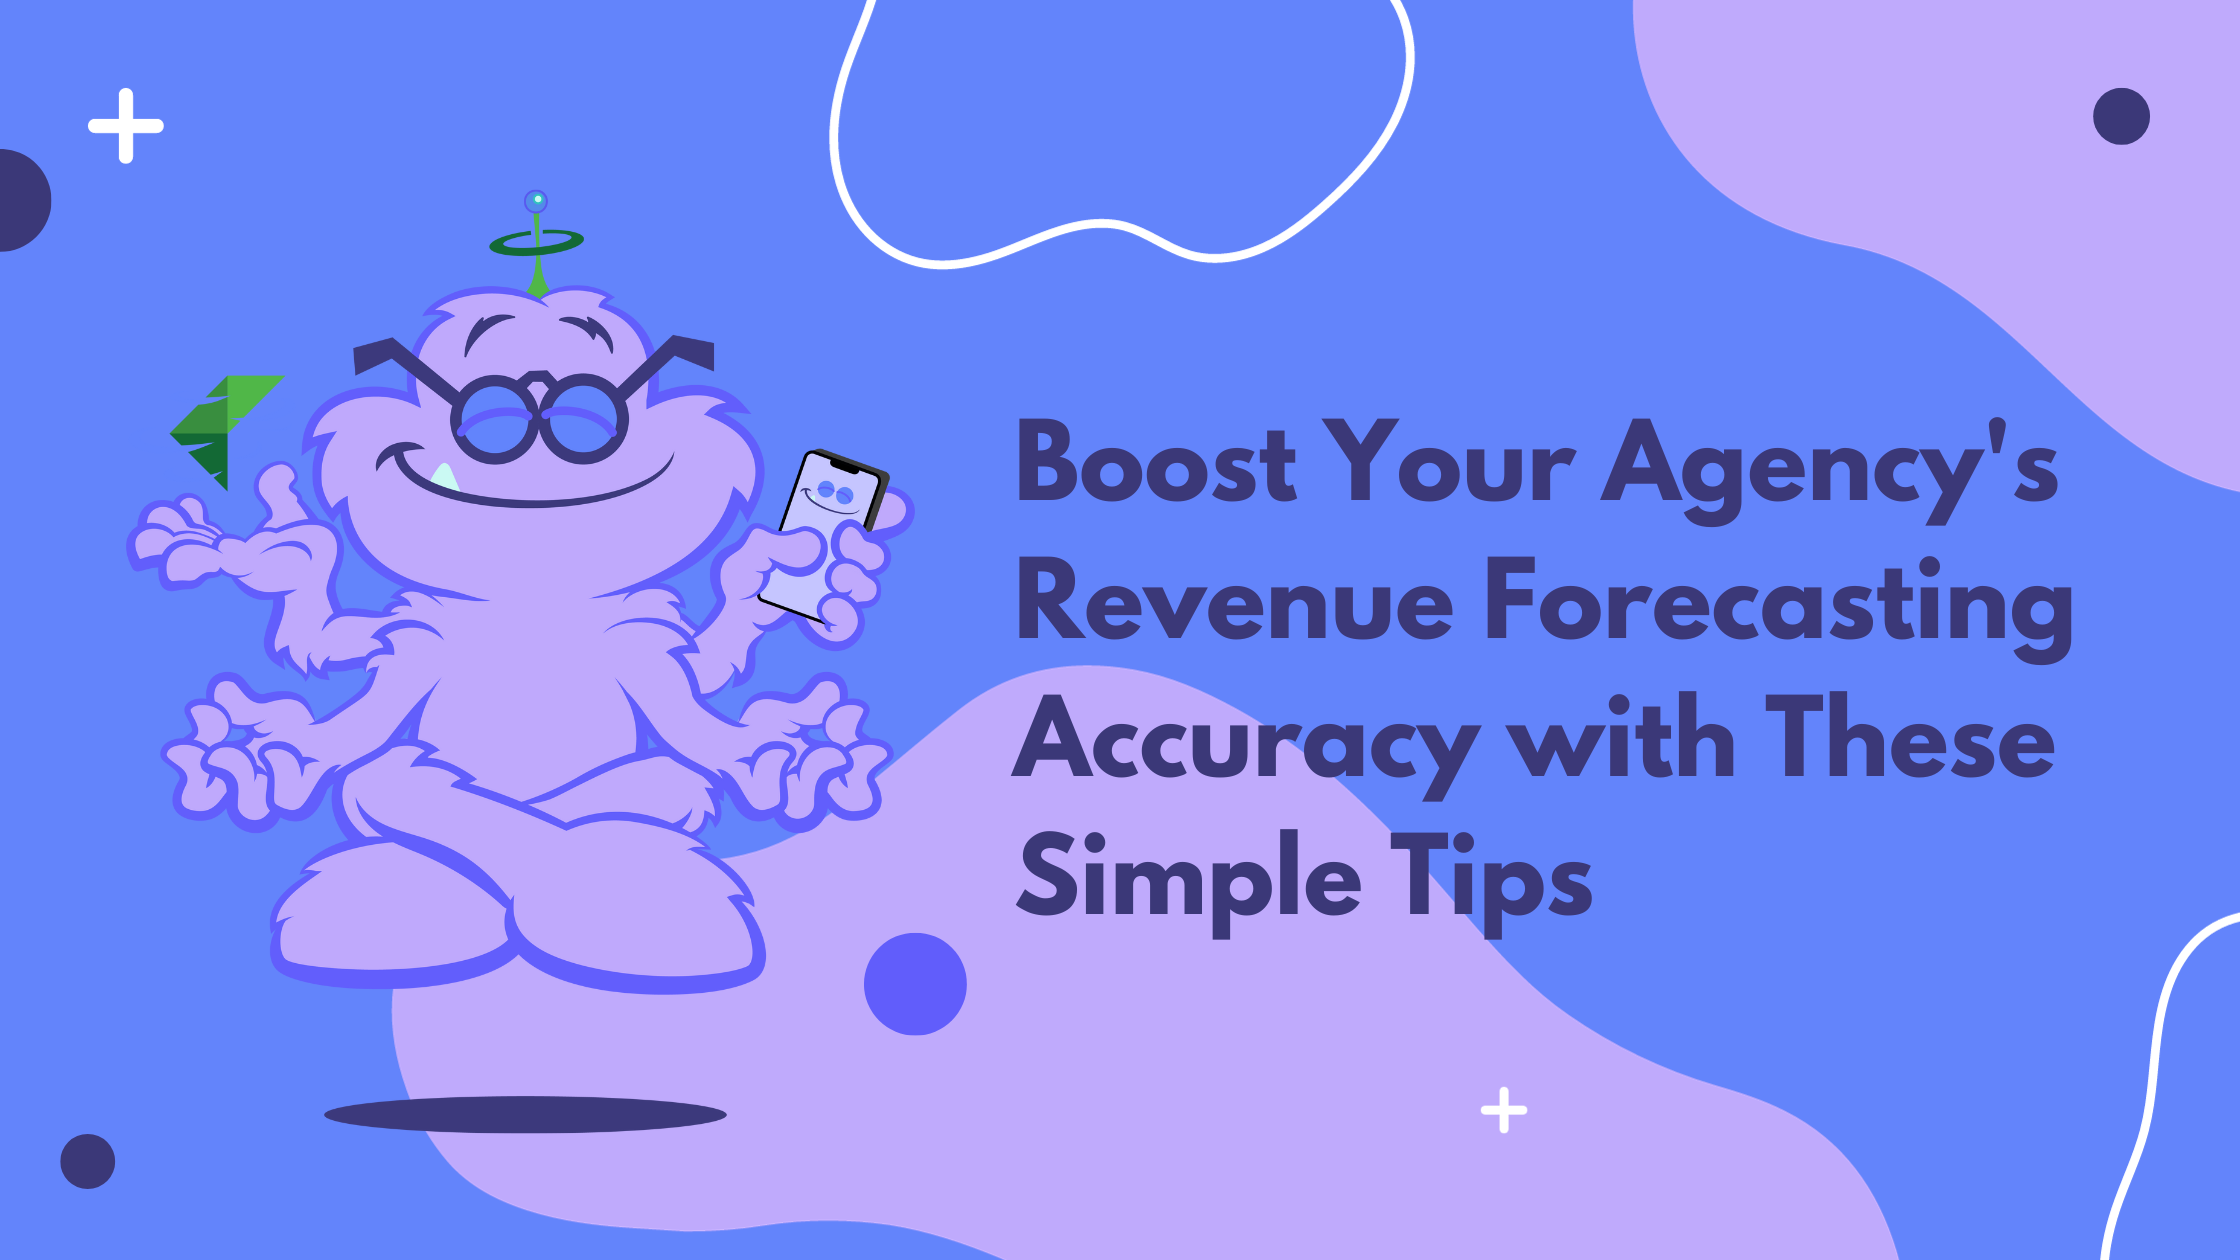 Boost Your Agency’s Revenue Forecasting Accuracy with These Simple Tips